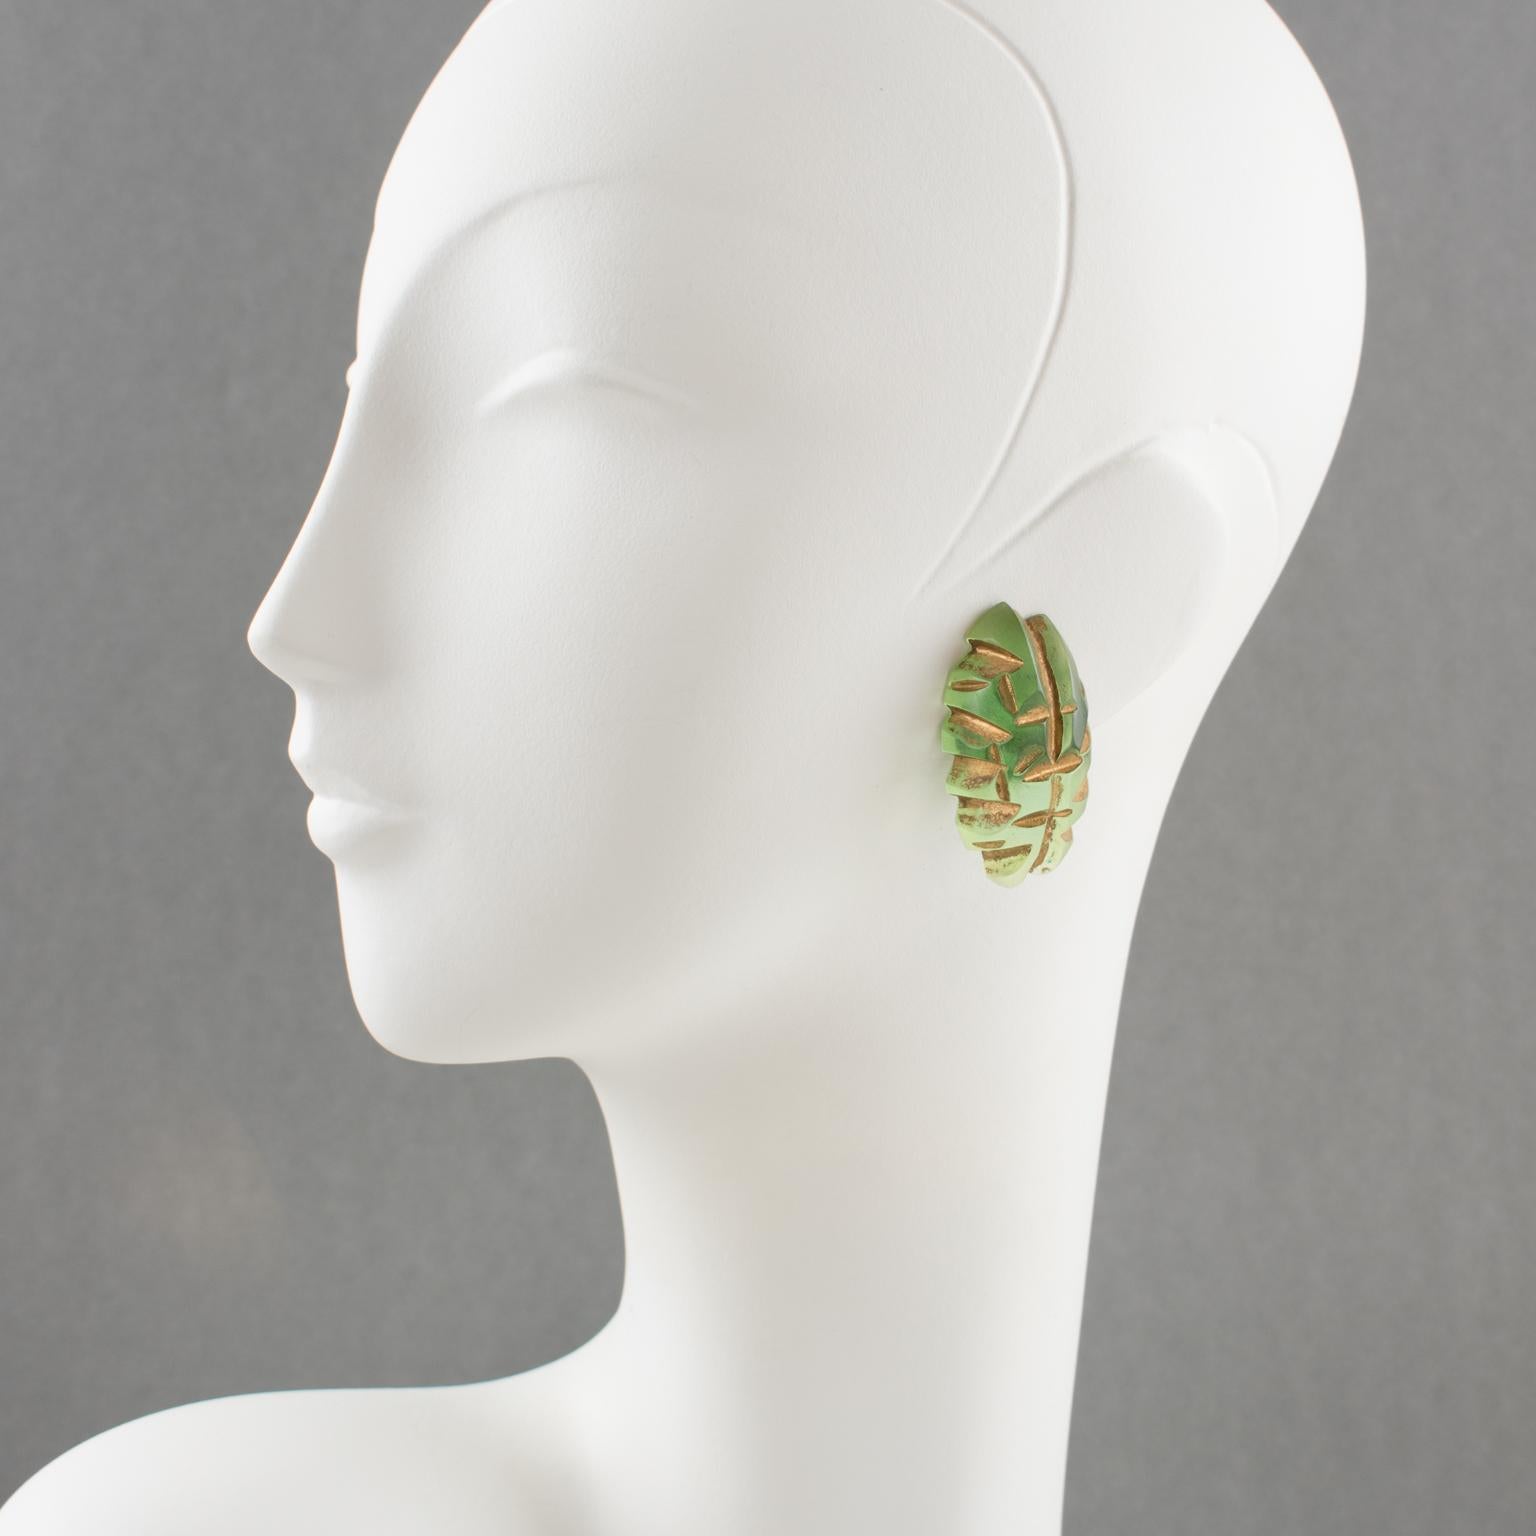 These elegant carved Lucite or resin clip-on earrings were crafted in the 1980s. The hand-made dimensional oval domed shape has a striped design in translucent fern green color and gold paint application in the carving. There is no visible maker's